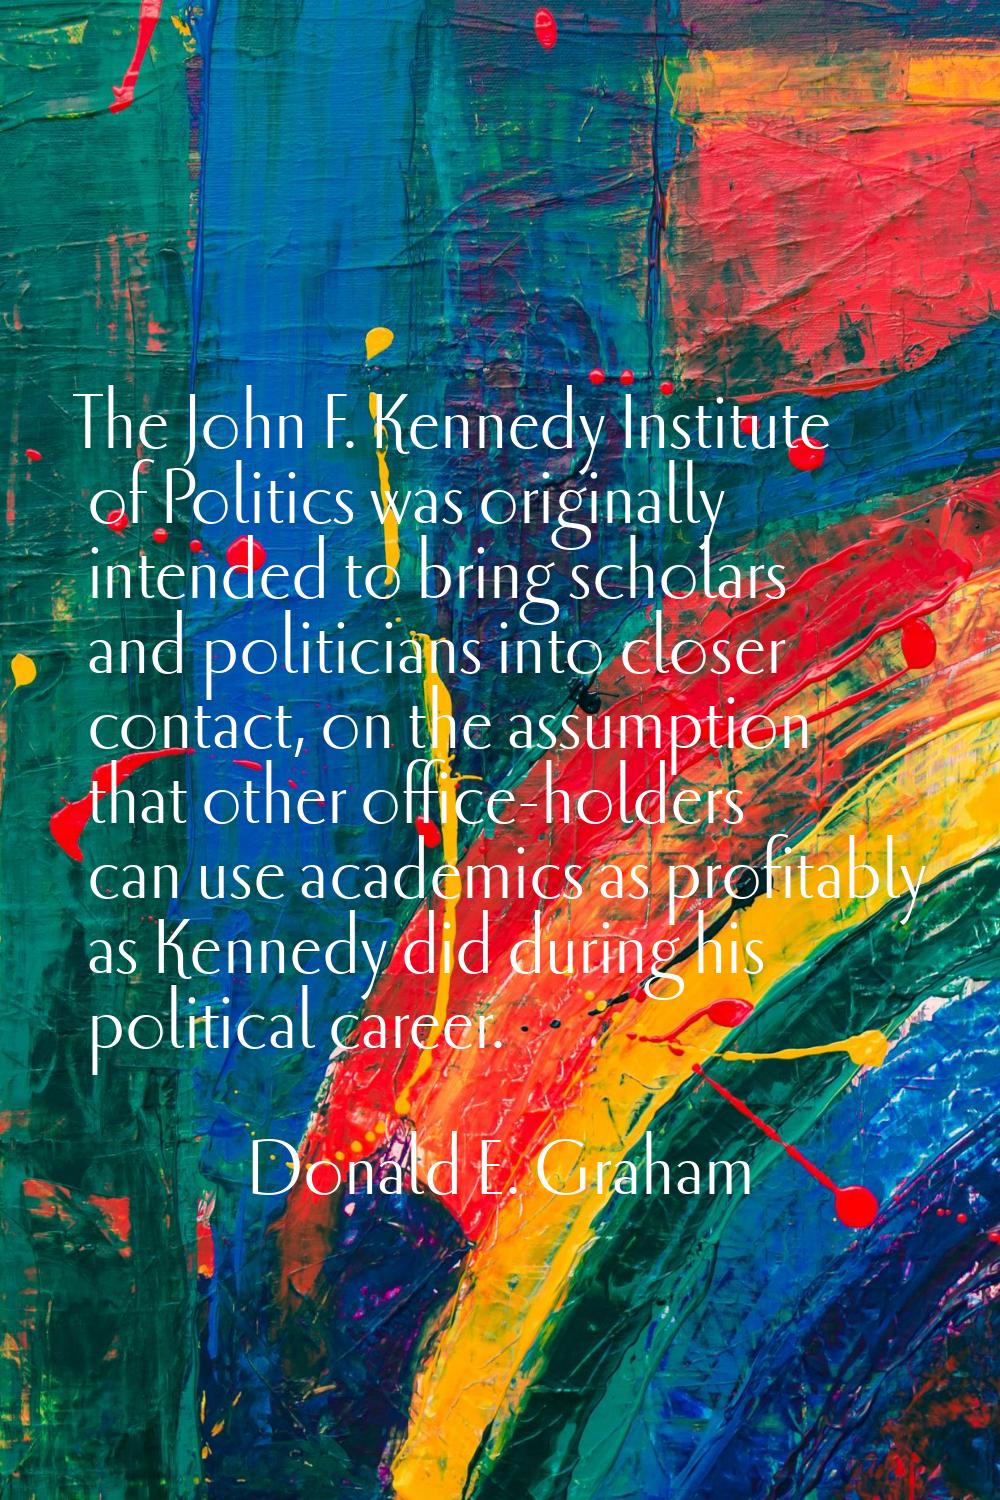 The John F. Kennedy Institute of Politics was originally intended to bring scholars and politicians